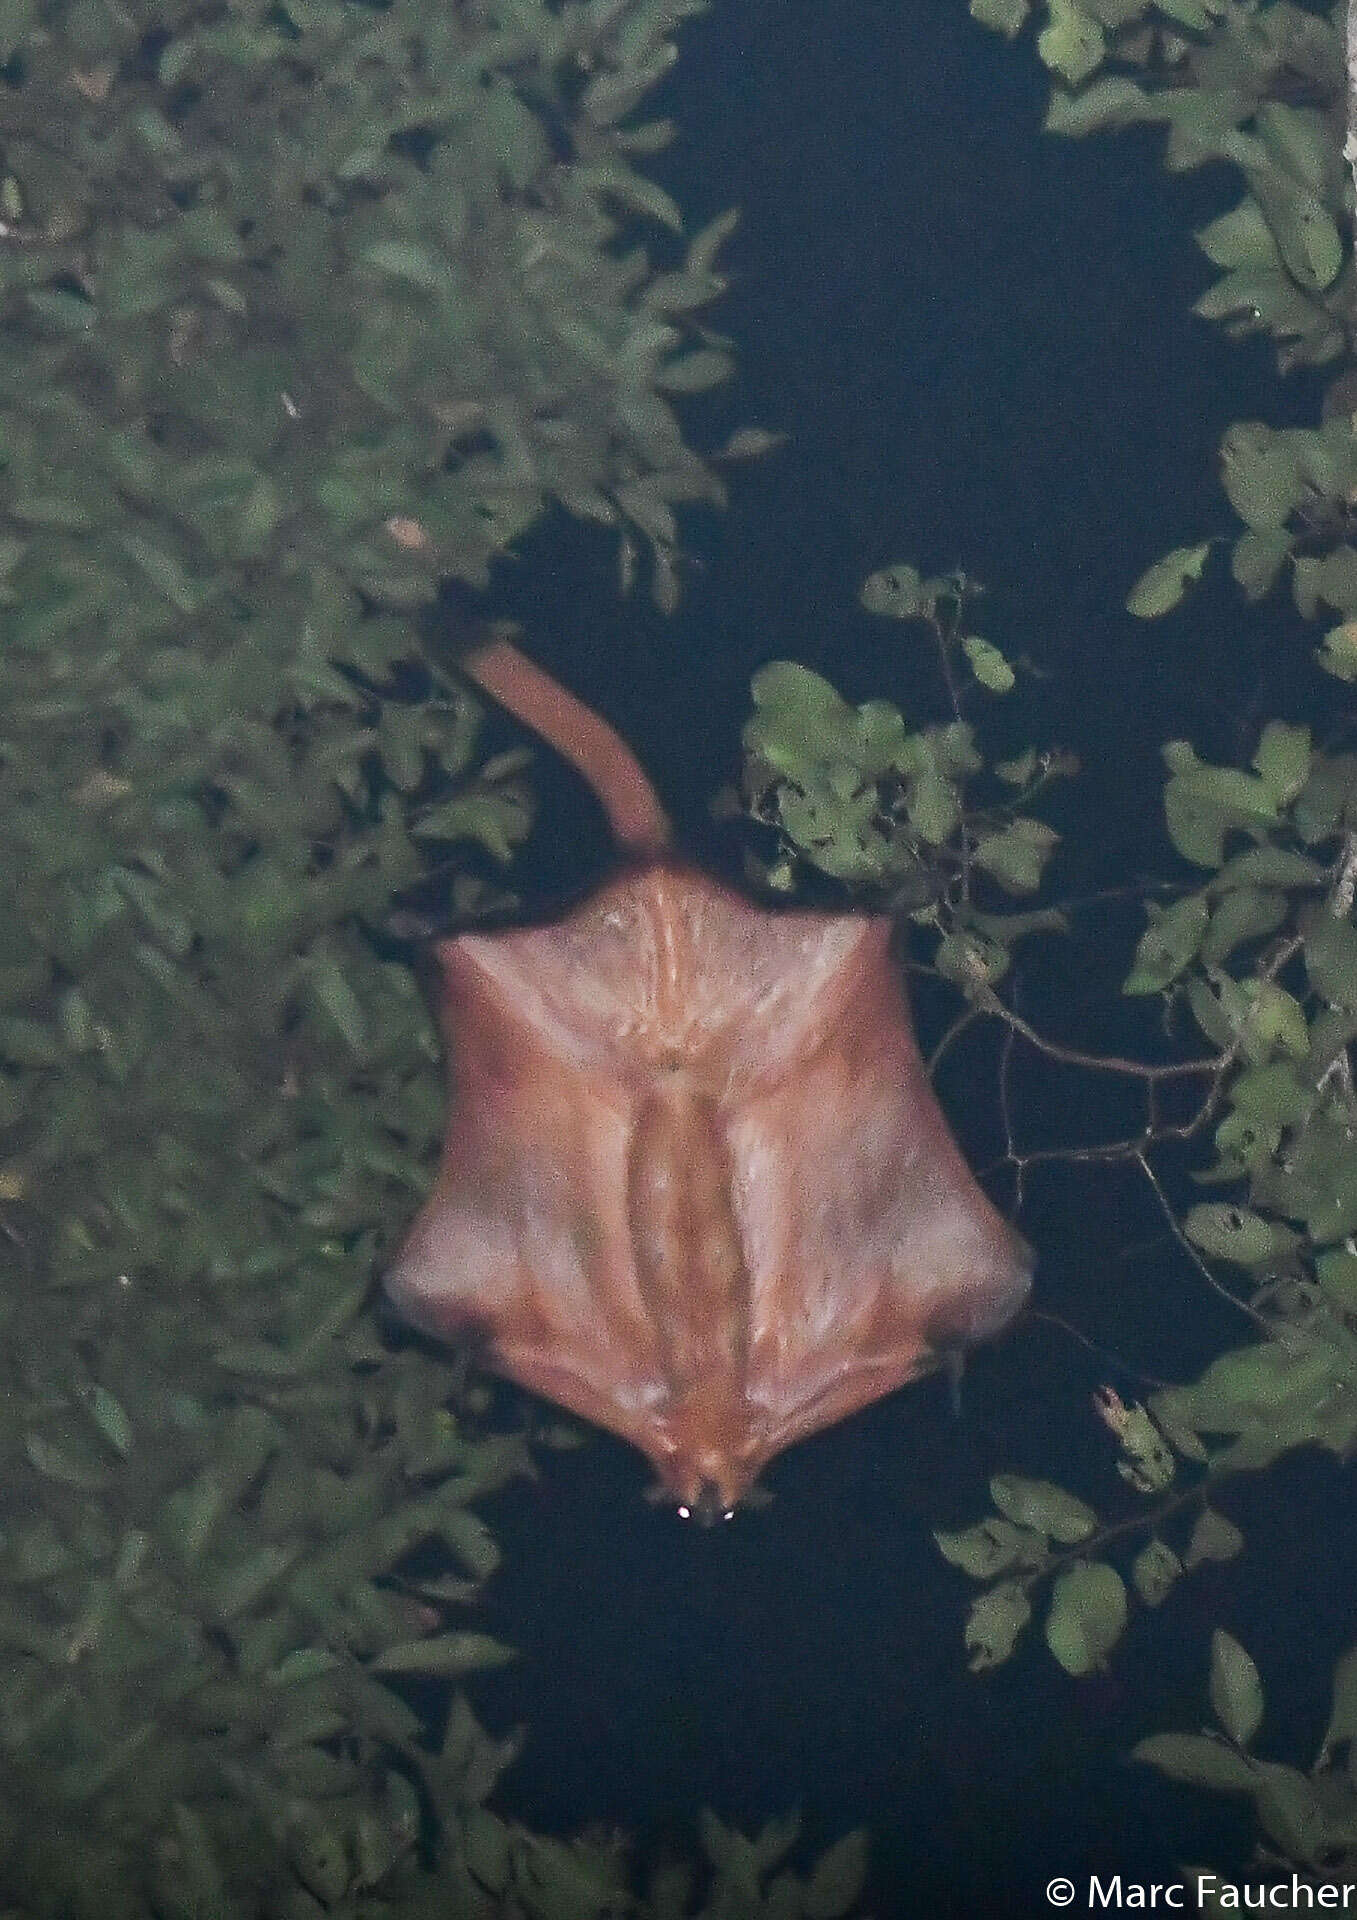 Image of Giant Flying Squirrels